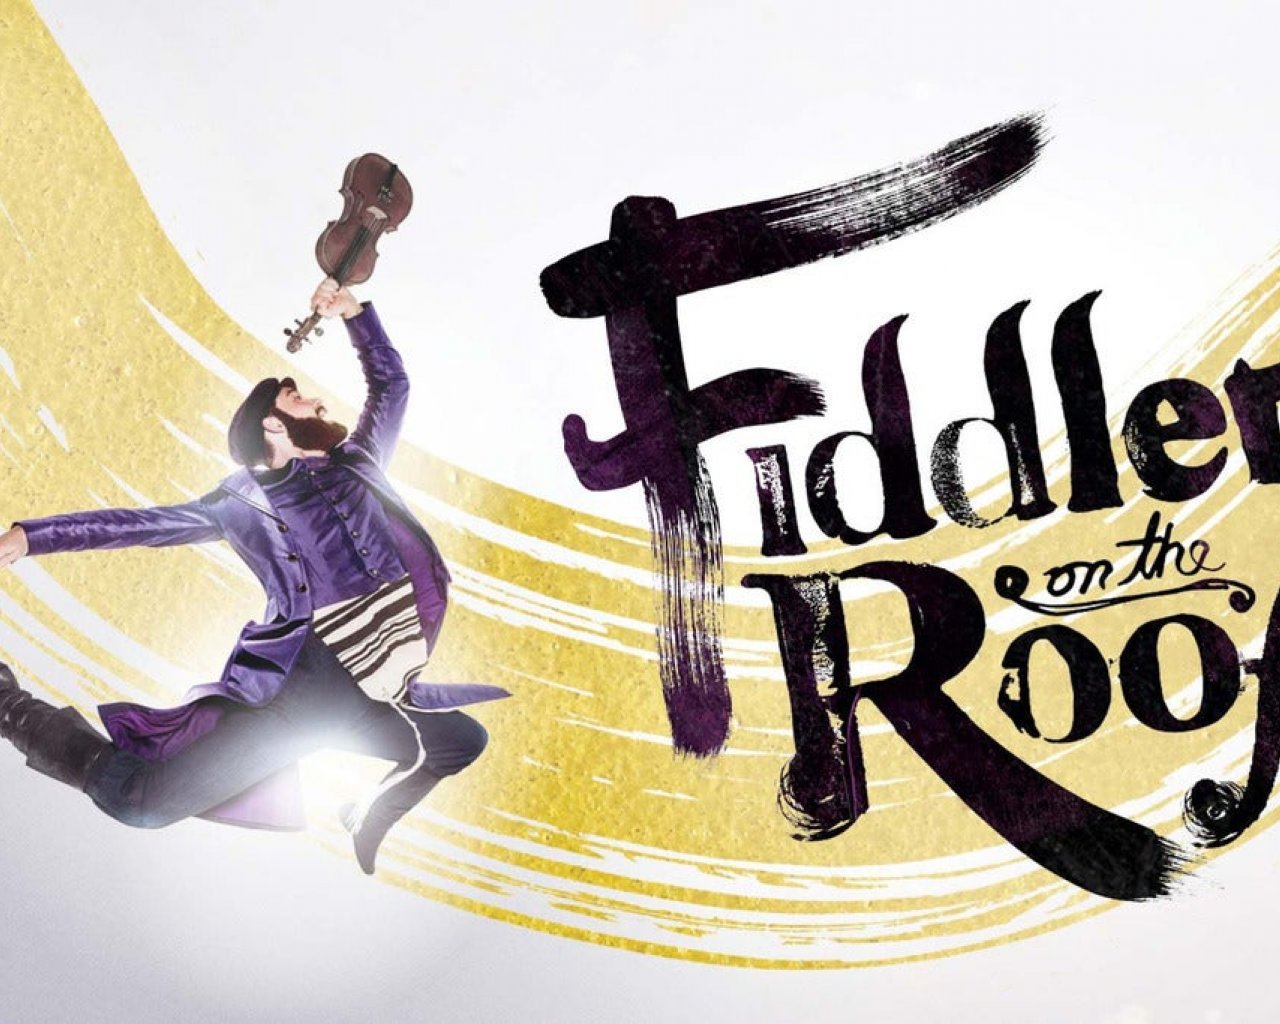 Fiddler on the Roof (Touring)